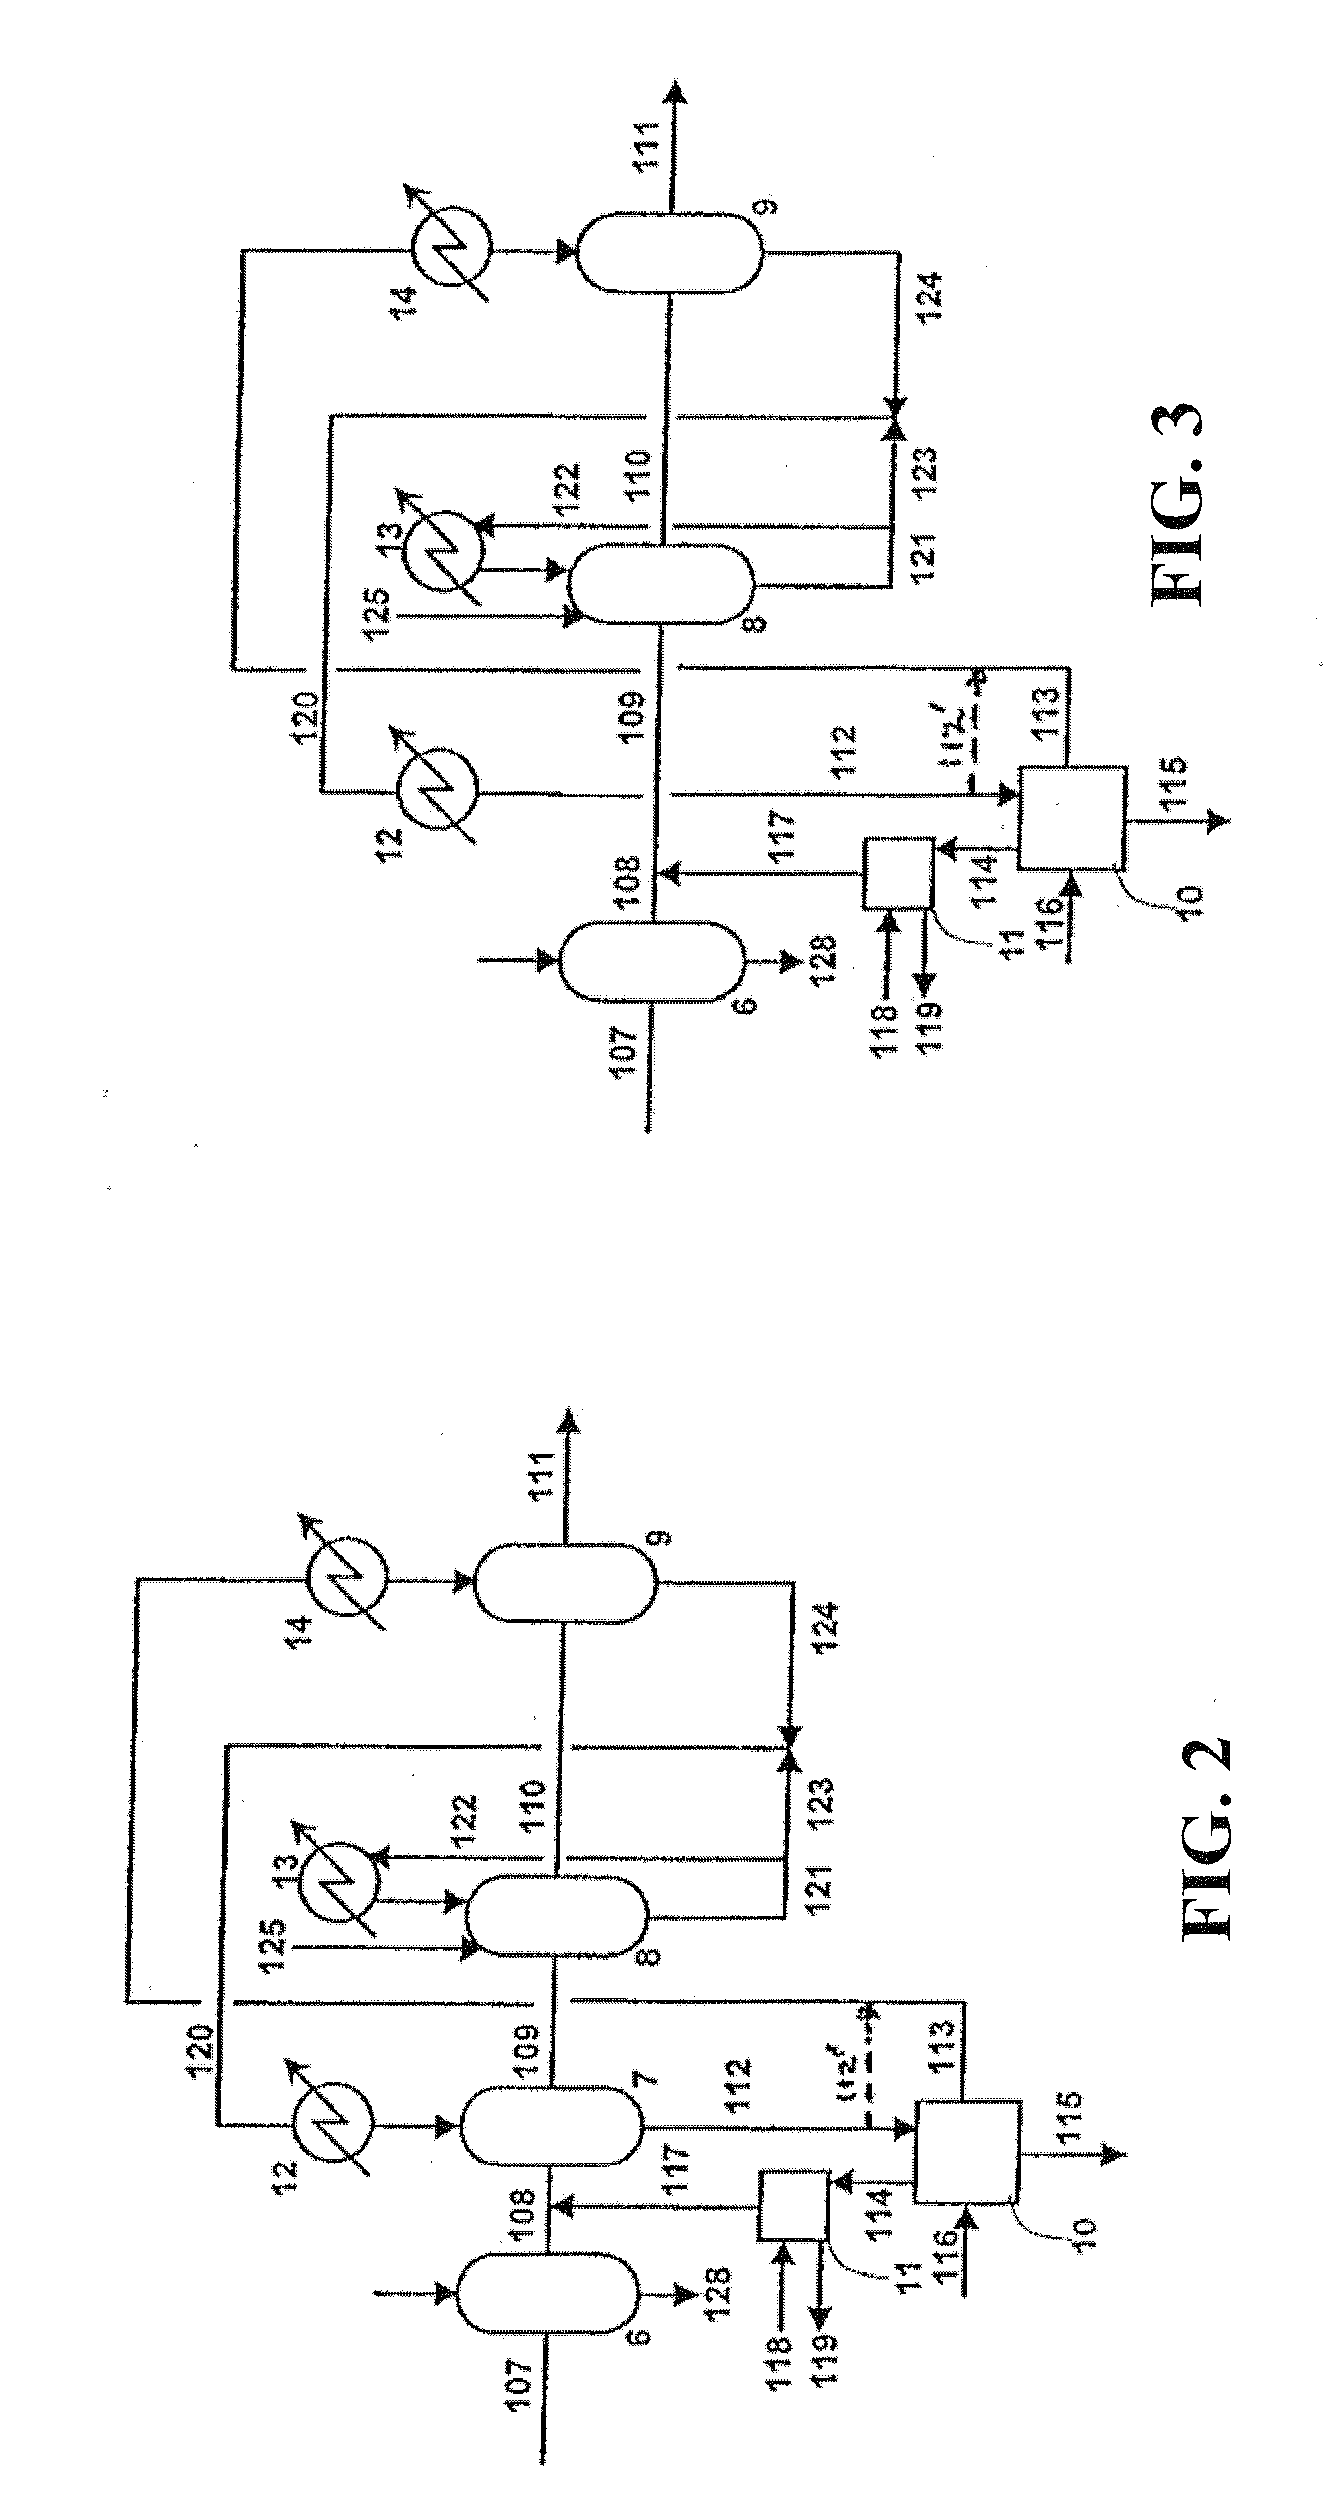 Multi-stage process for purifying carbon dioxide and producing acid